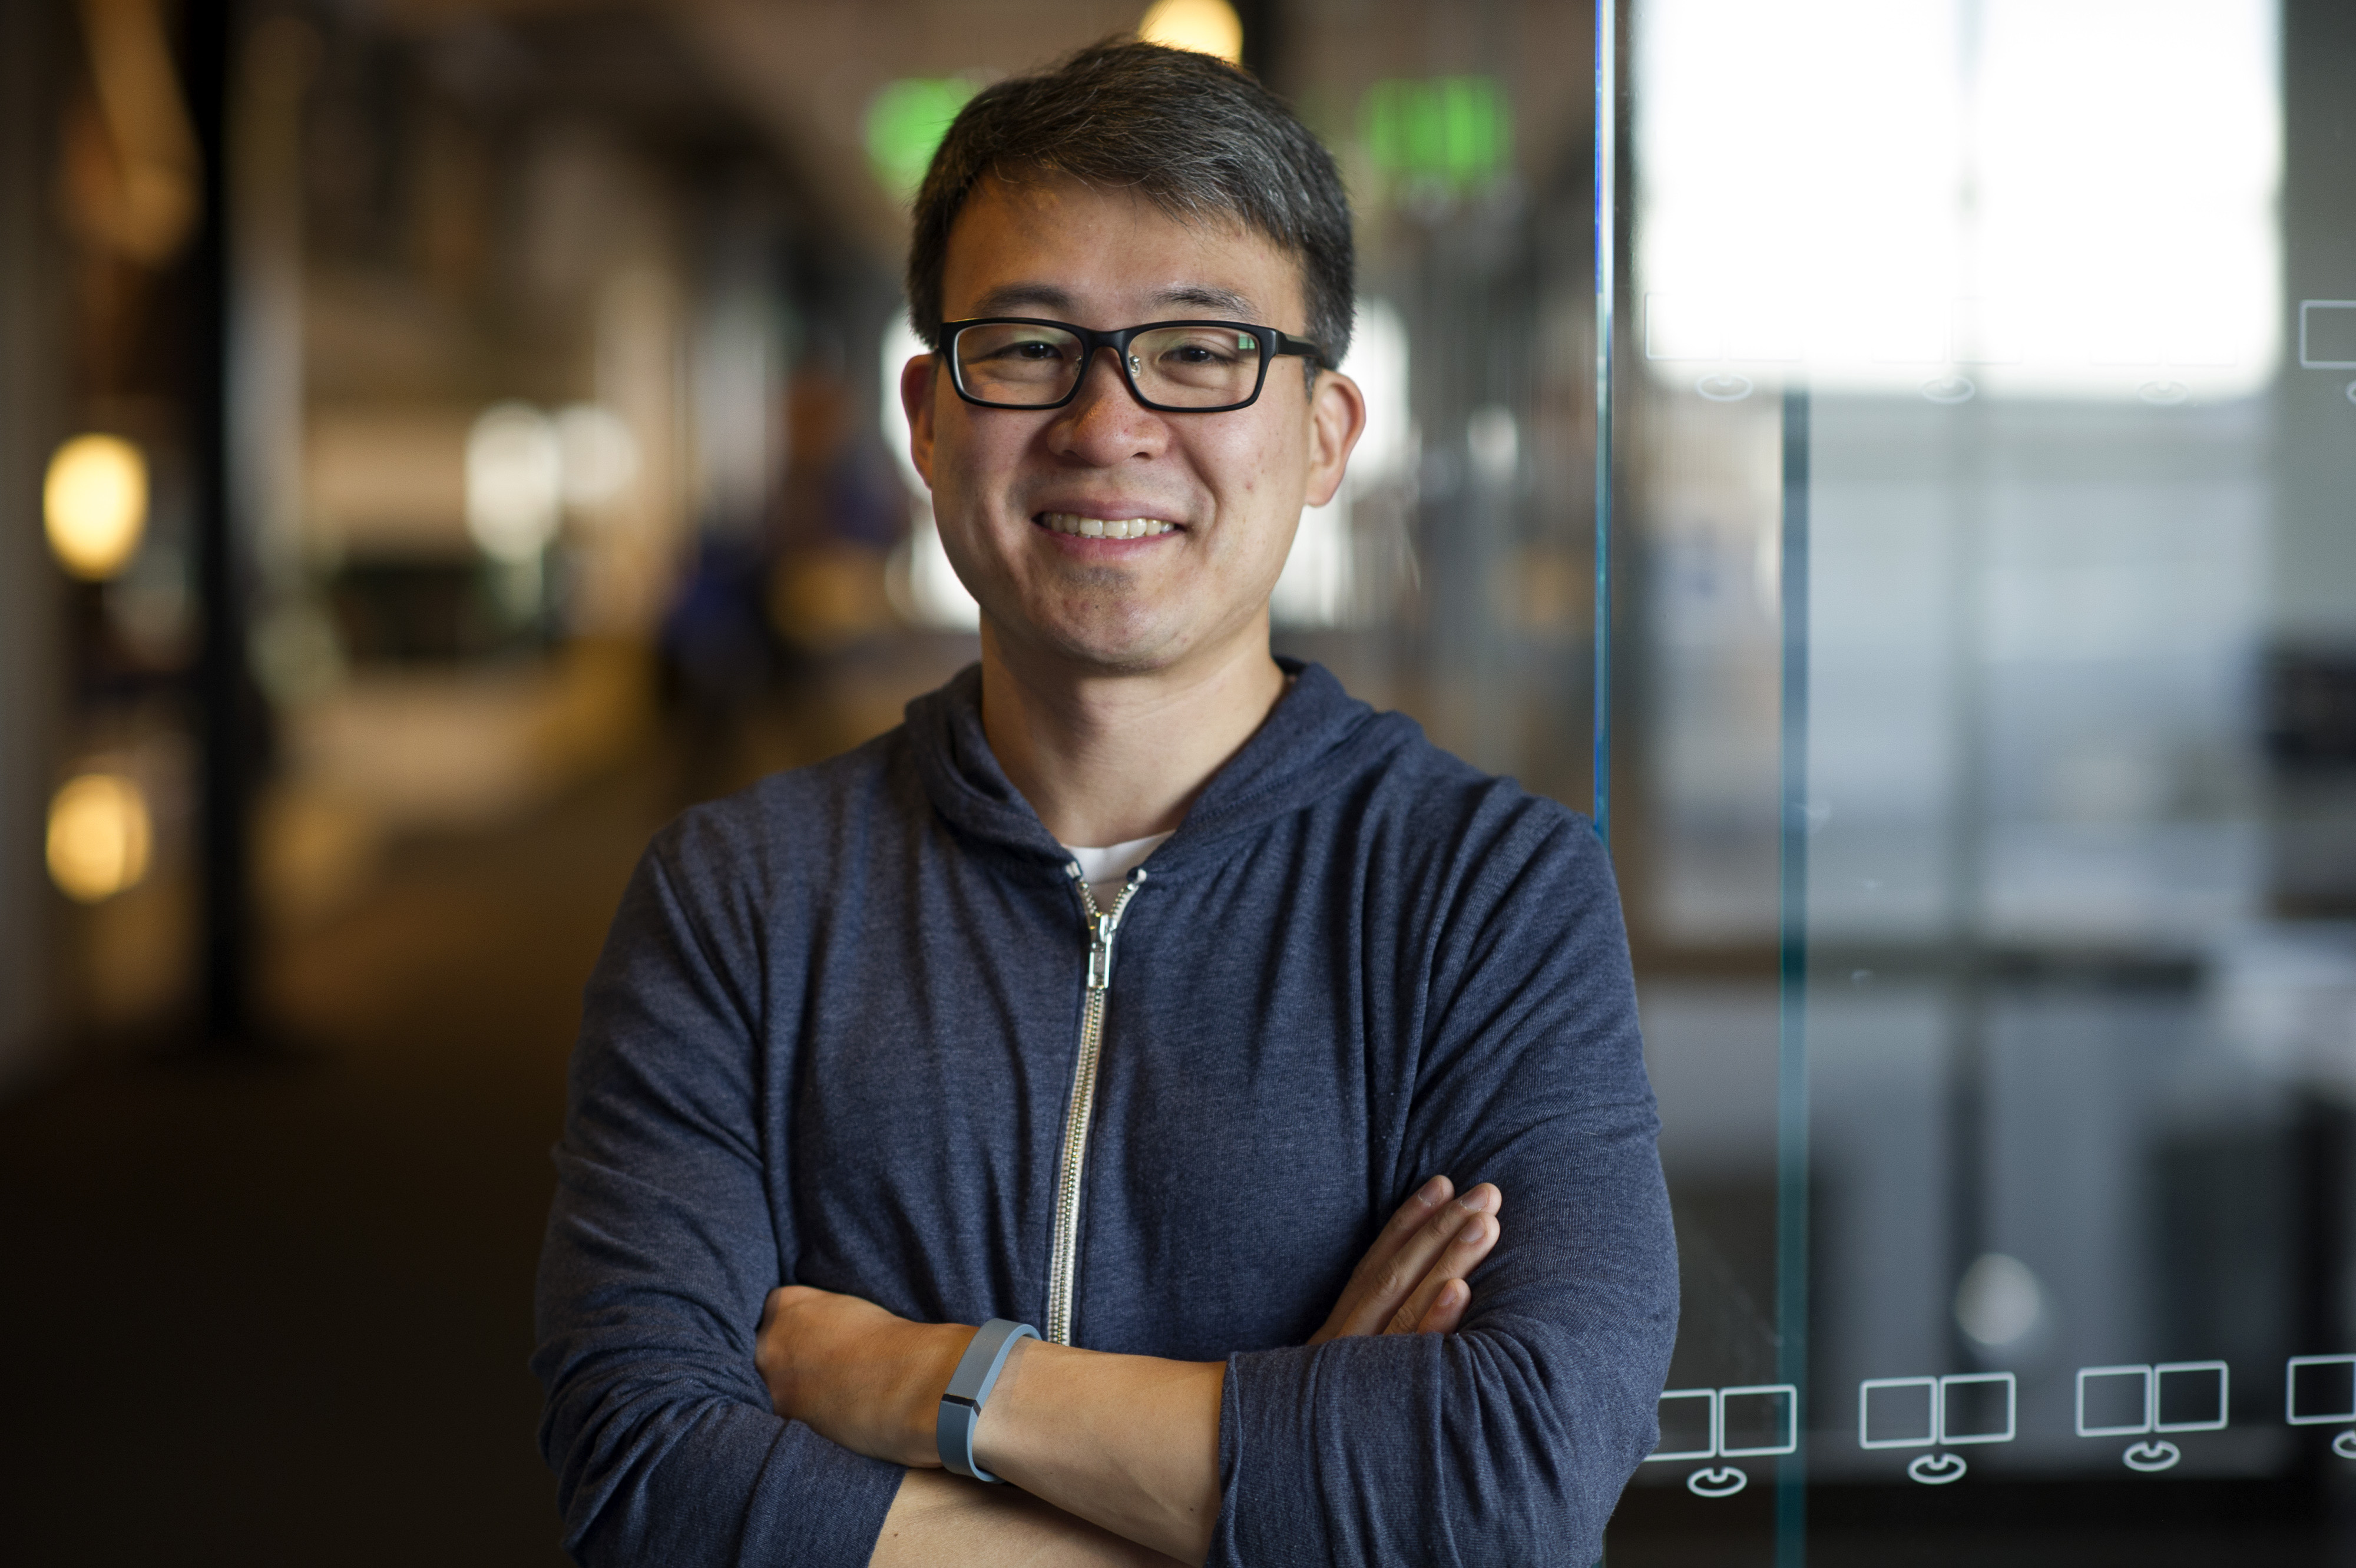 James Park, co-founder and chief executive officer of Fitbit Inc. in San Francisco on Aug. 22, 2014.